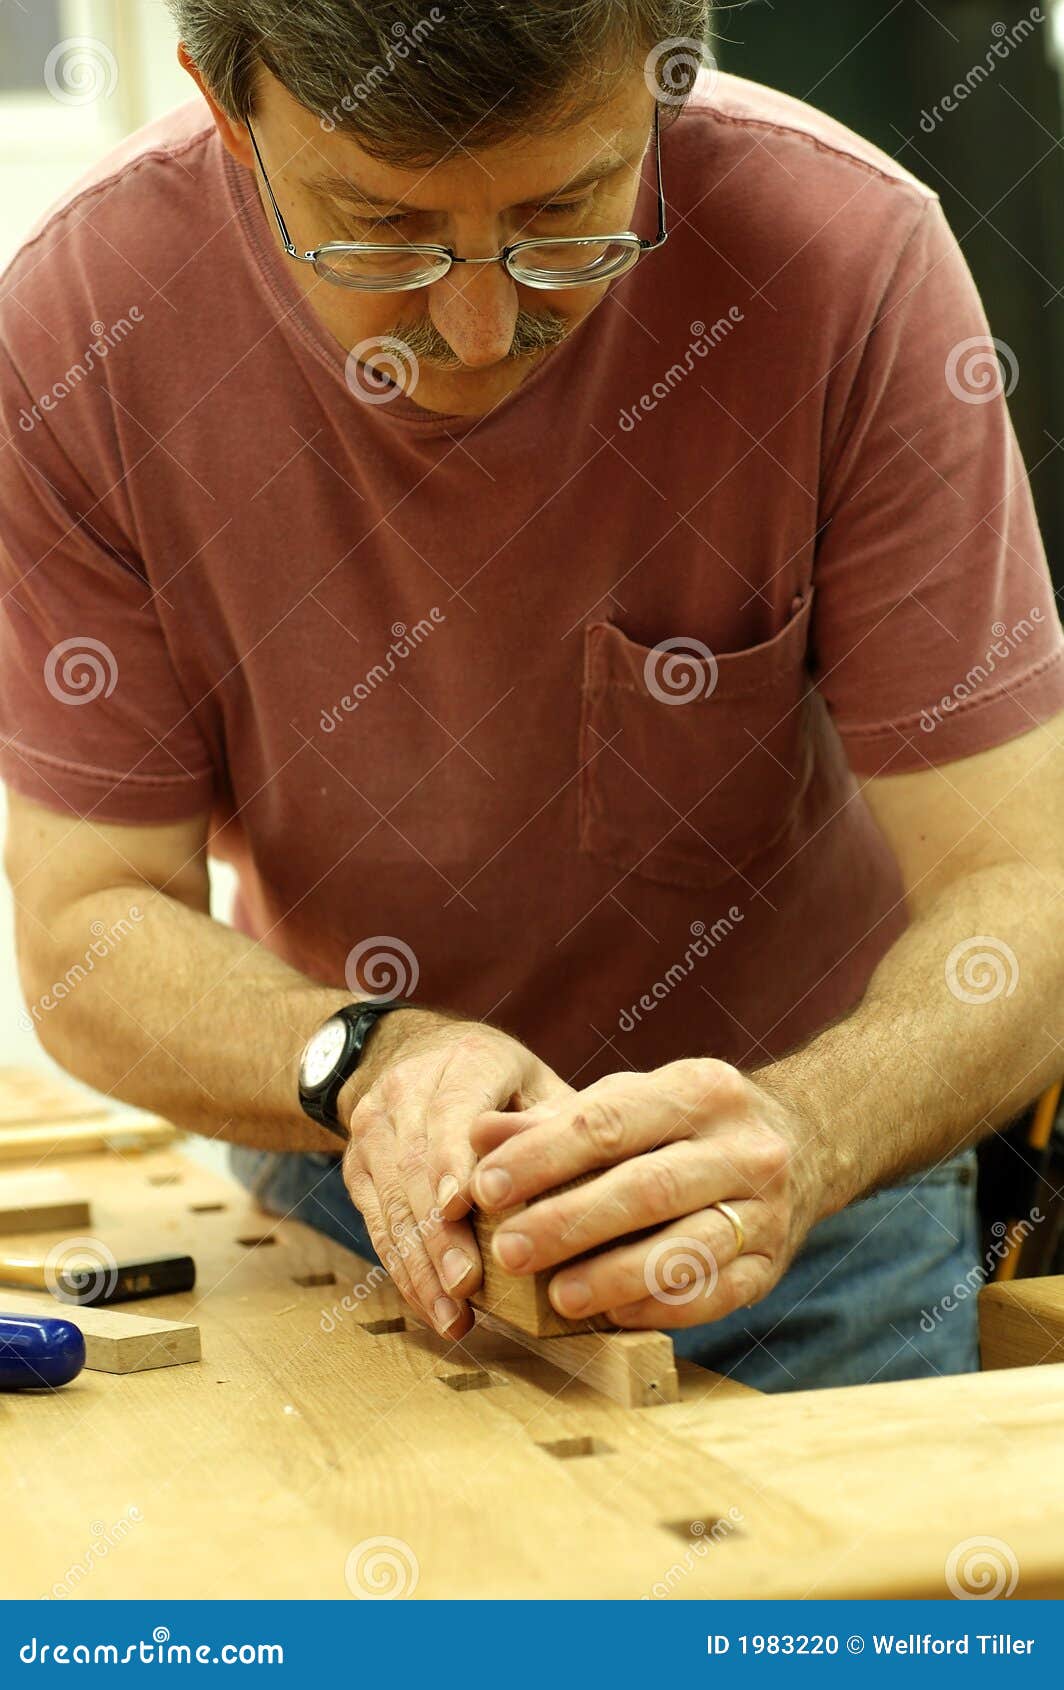 woodworker using a plane